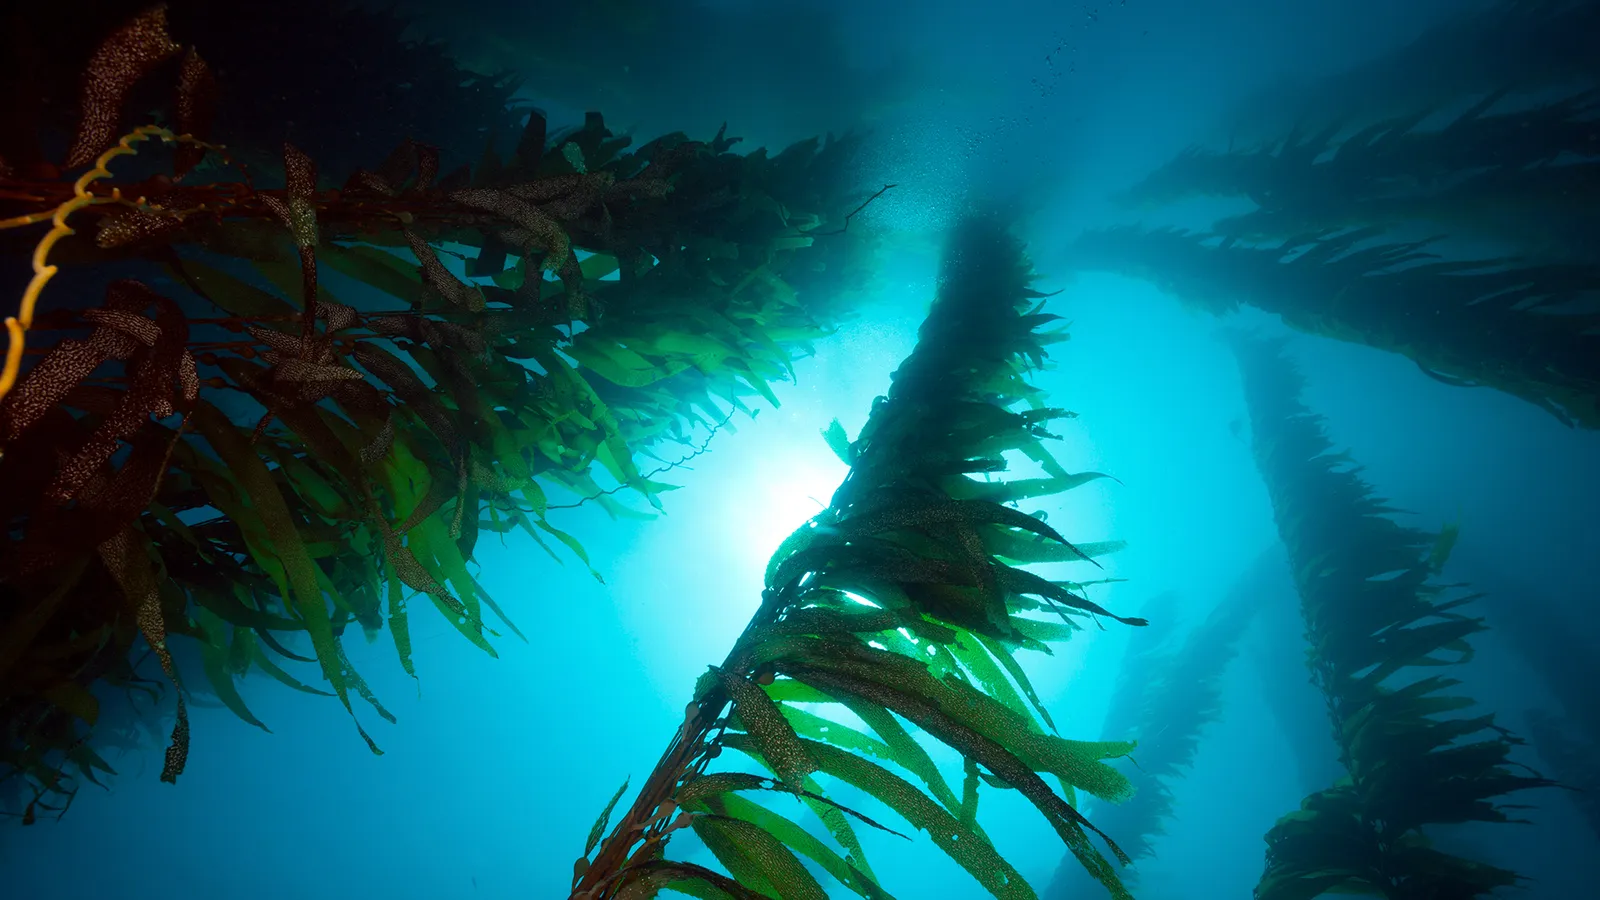 An underwater view of tall strands of kelp reaching toward the sun